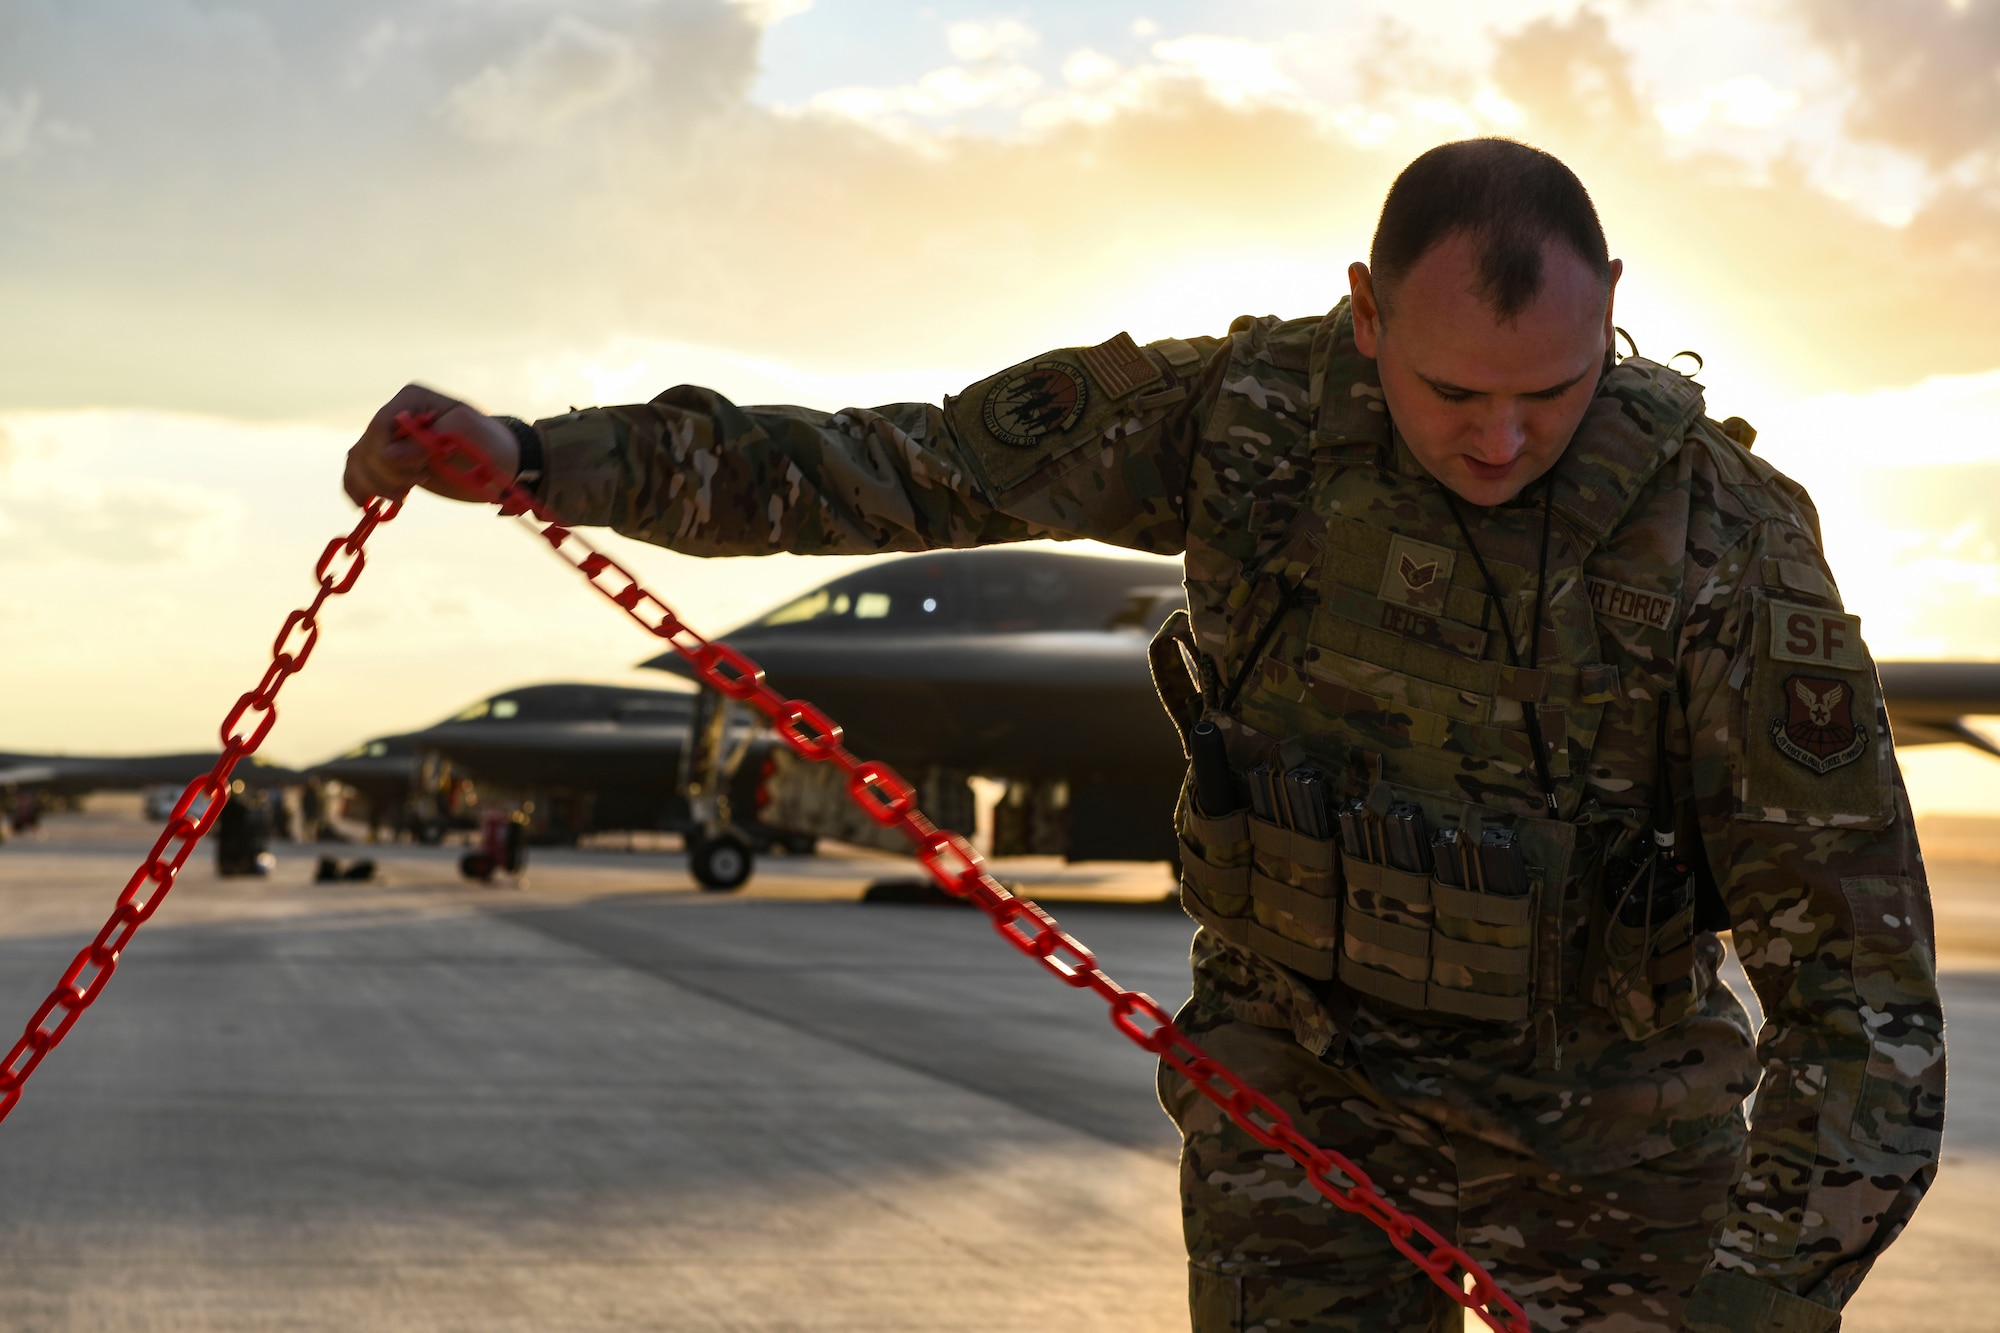 U.S. Air Force Staff Sgt. William Deitt, 509th Security Forces Squadron combat arms instructor, sets up a cordon during Red Flag 21-1, at Nellis Air Force Base, Nevada, Jan. 22, 2021. Along with aircrew, Team Whiteman brought approximately 100 Airmen to participate in the large force exercise and to be the lead wing. As the lead Wing, RF 21-1 enables Team Whiteman to maintain a high state of readiness and proficiency, while validating our always-ready global strike capability. (U.S. Air Force photo by Staff Sgt. Sadie Colbert)